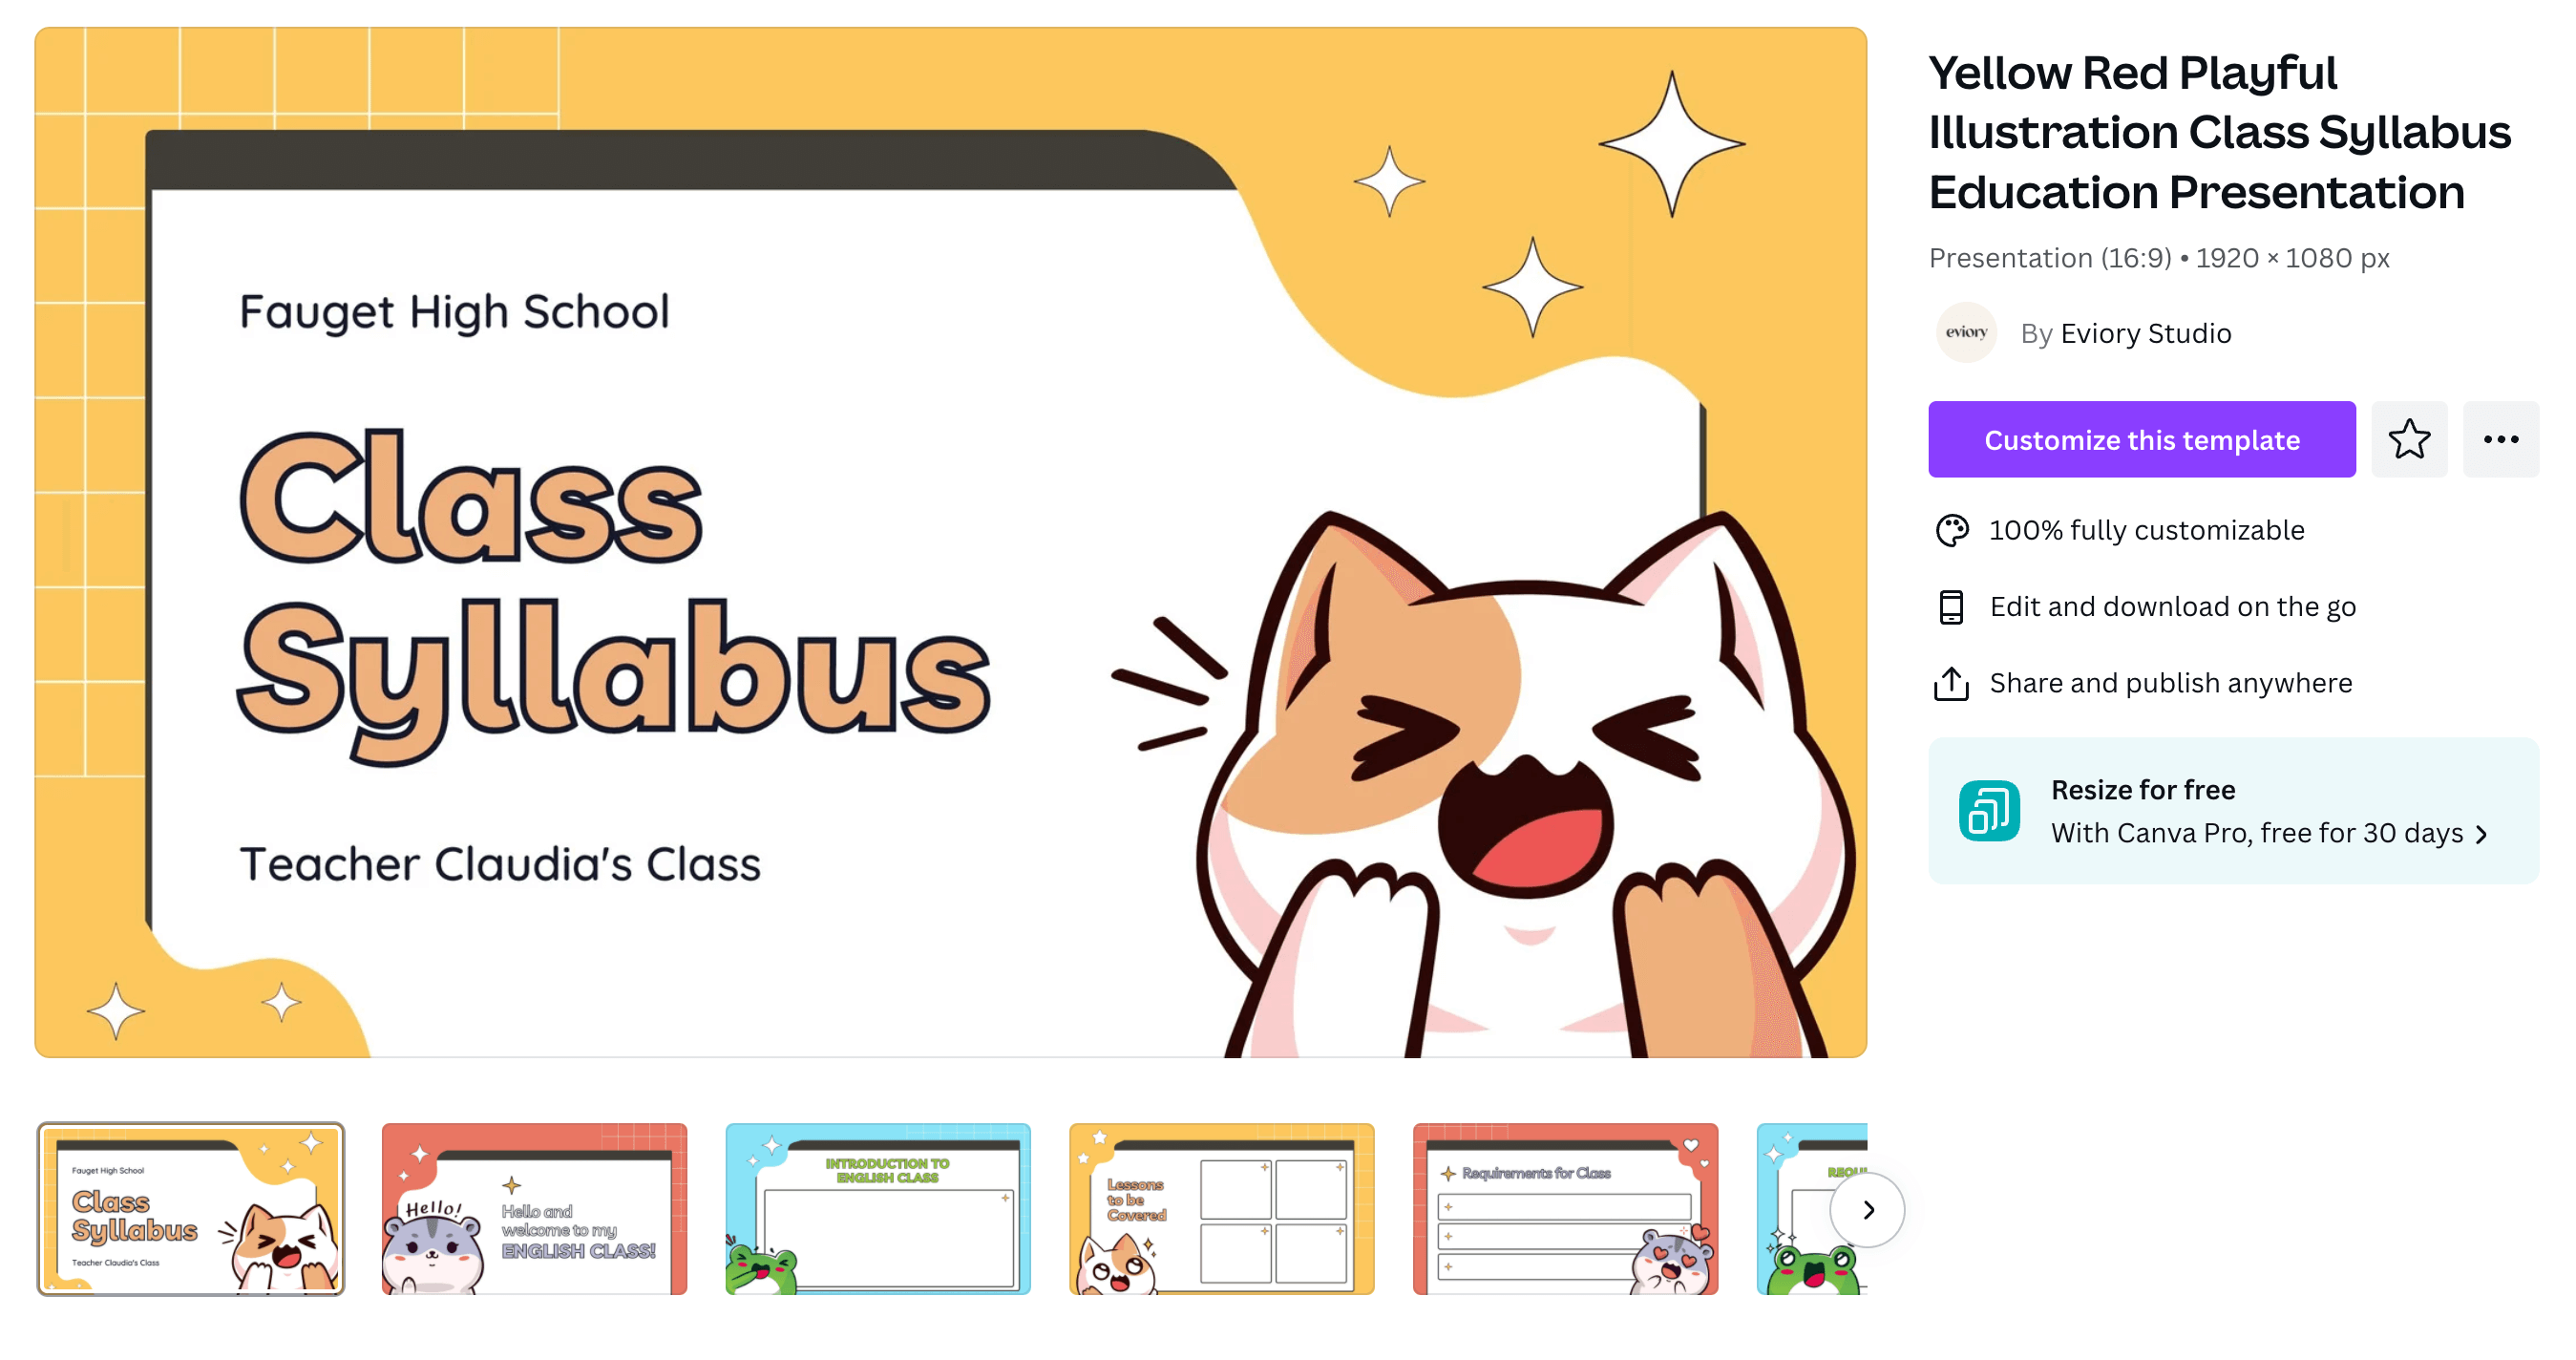 A cartoony slideshow template. The first slide says "Fauget High School Class Syllabus" and has a picture of a laughing cat.